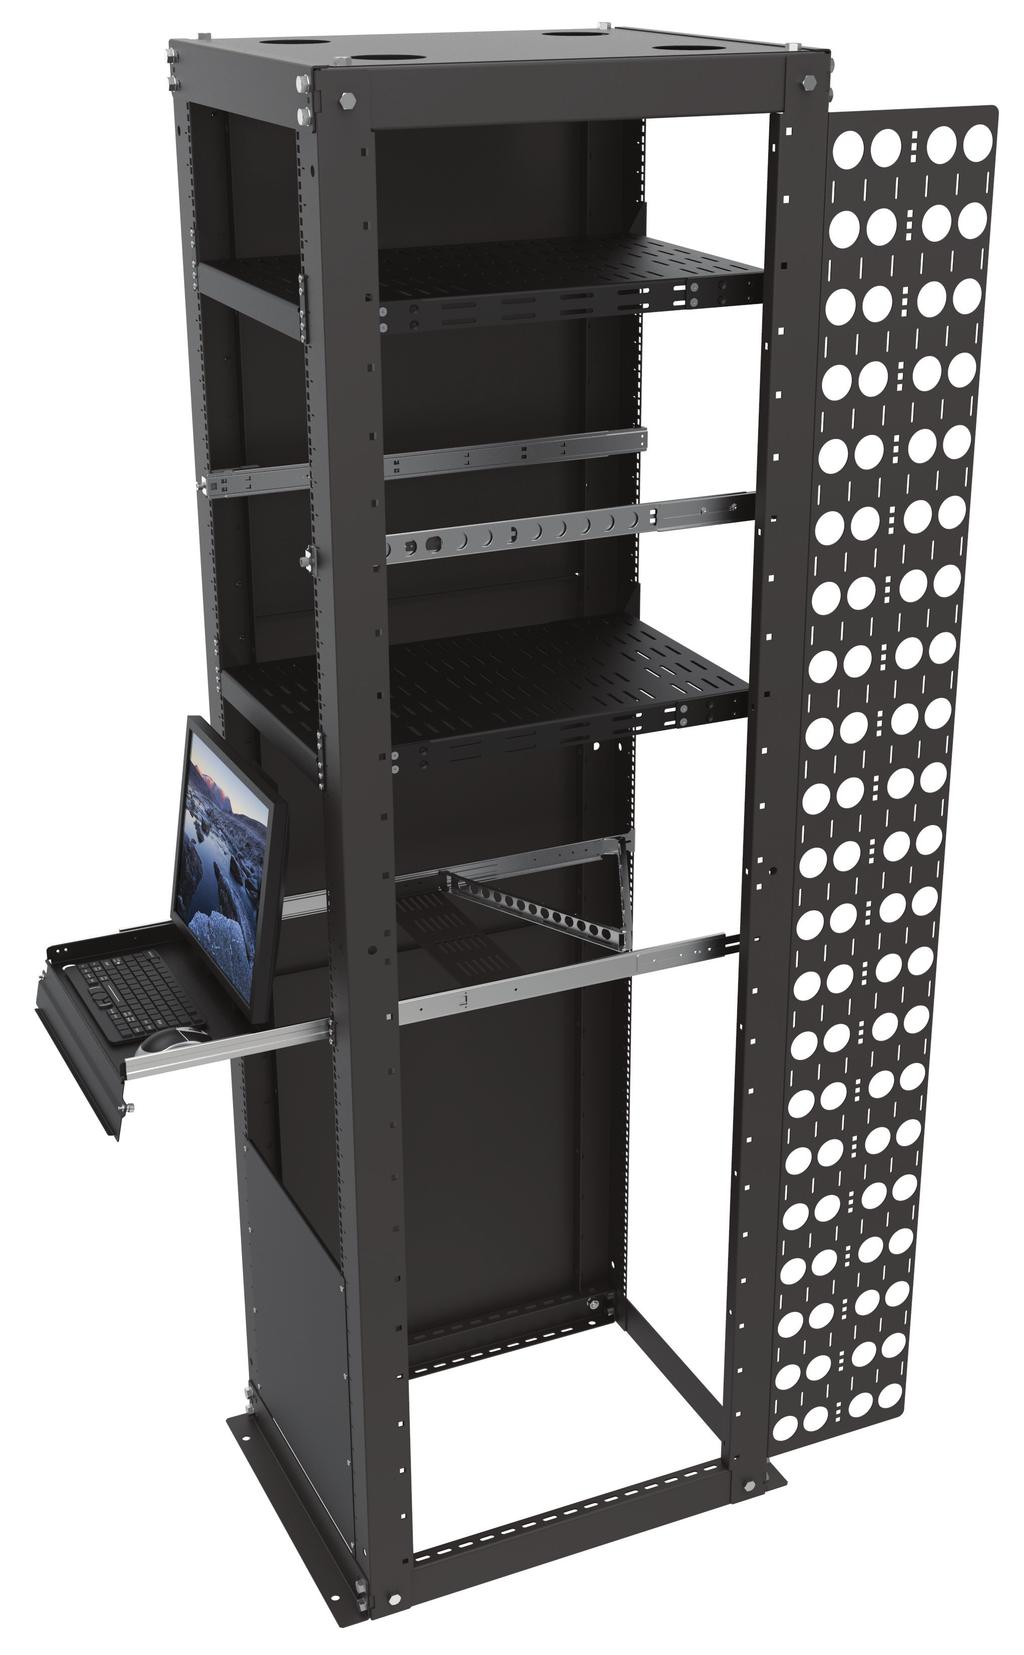 Designed and Built to Exceed Your Needs. The Open Frame Server Rack is designed to provide users with a customizable solution engineered to meet a diverse set of rack mounting needs.